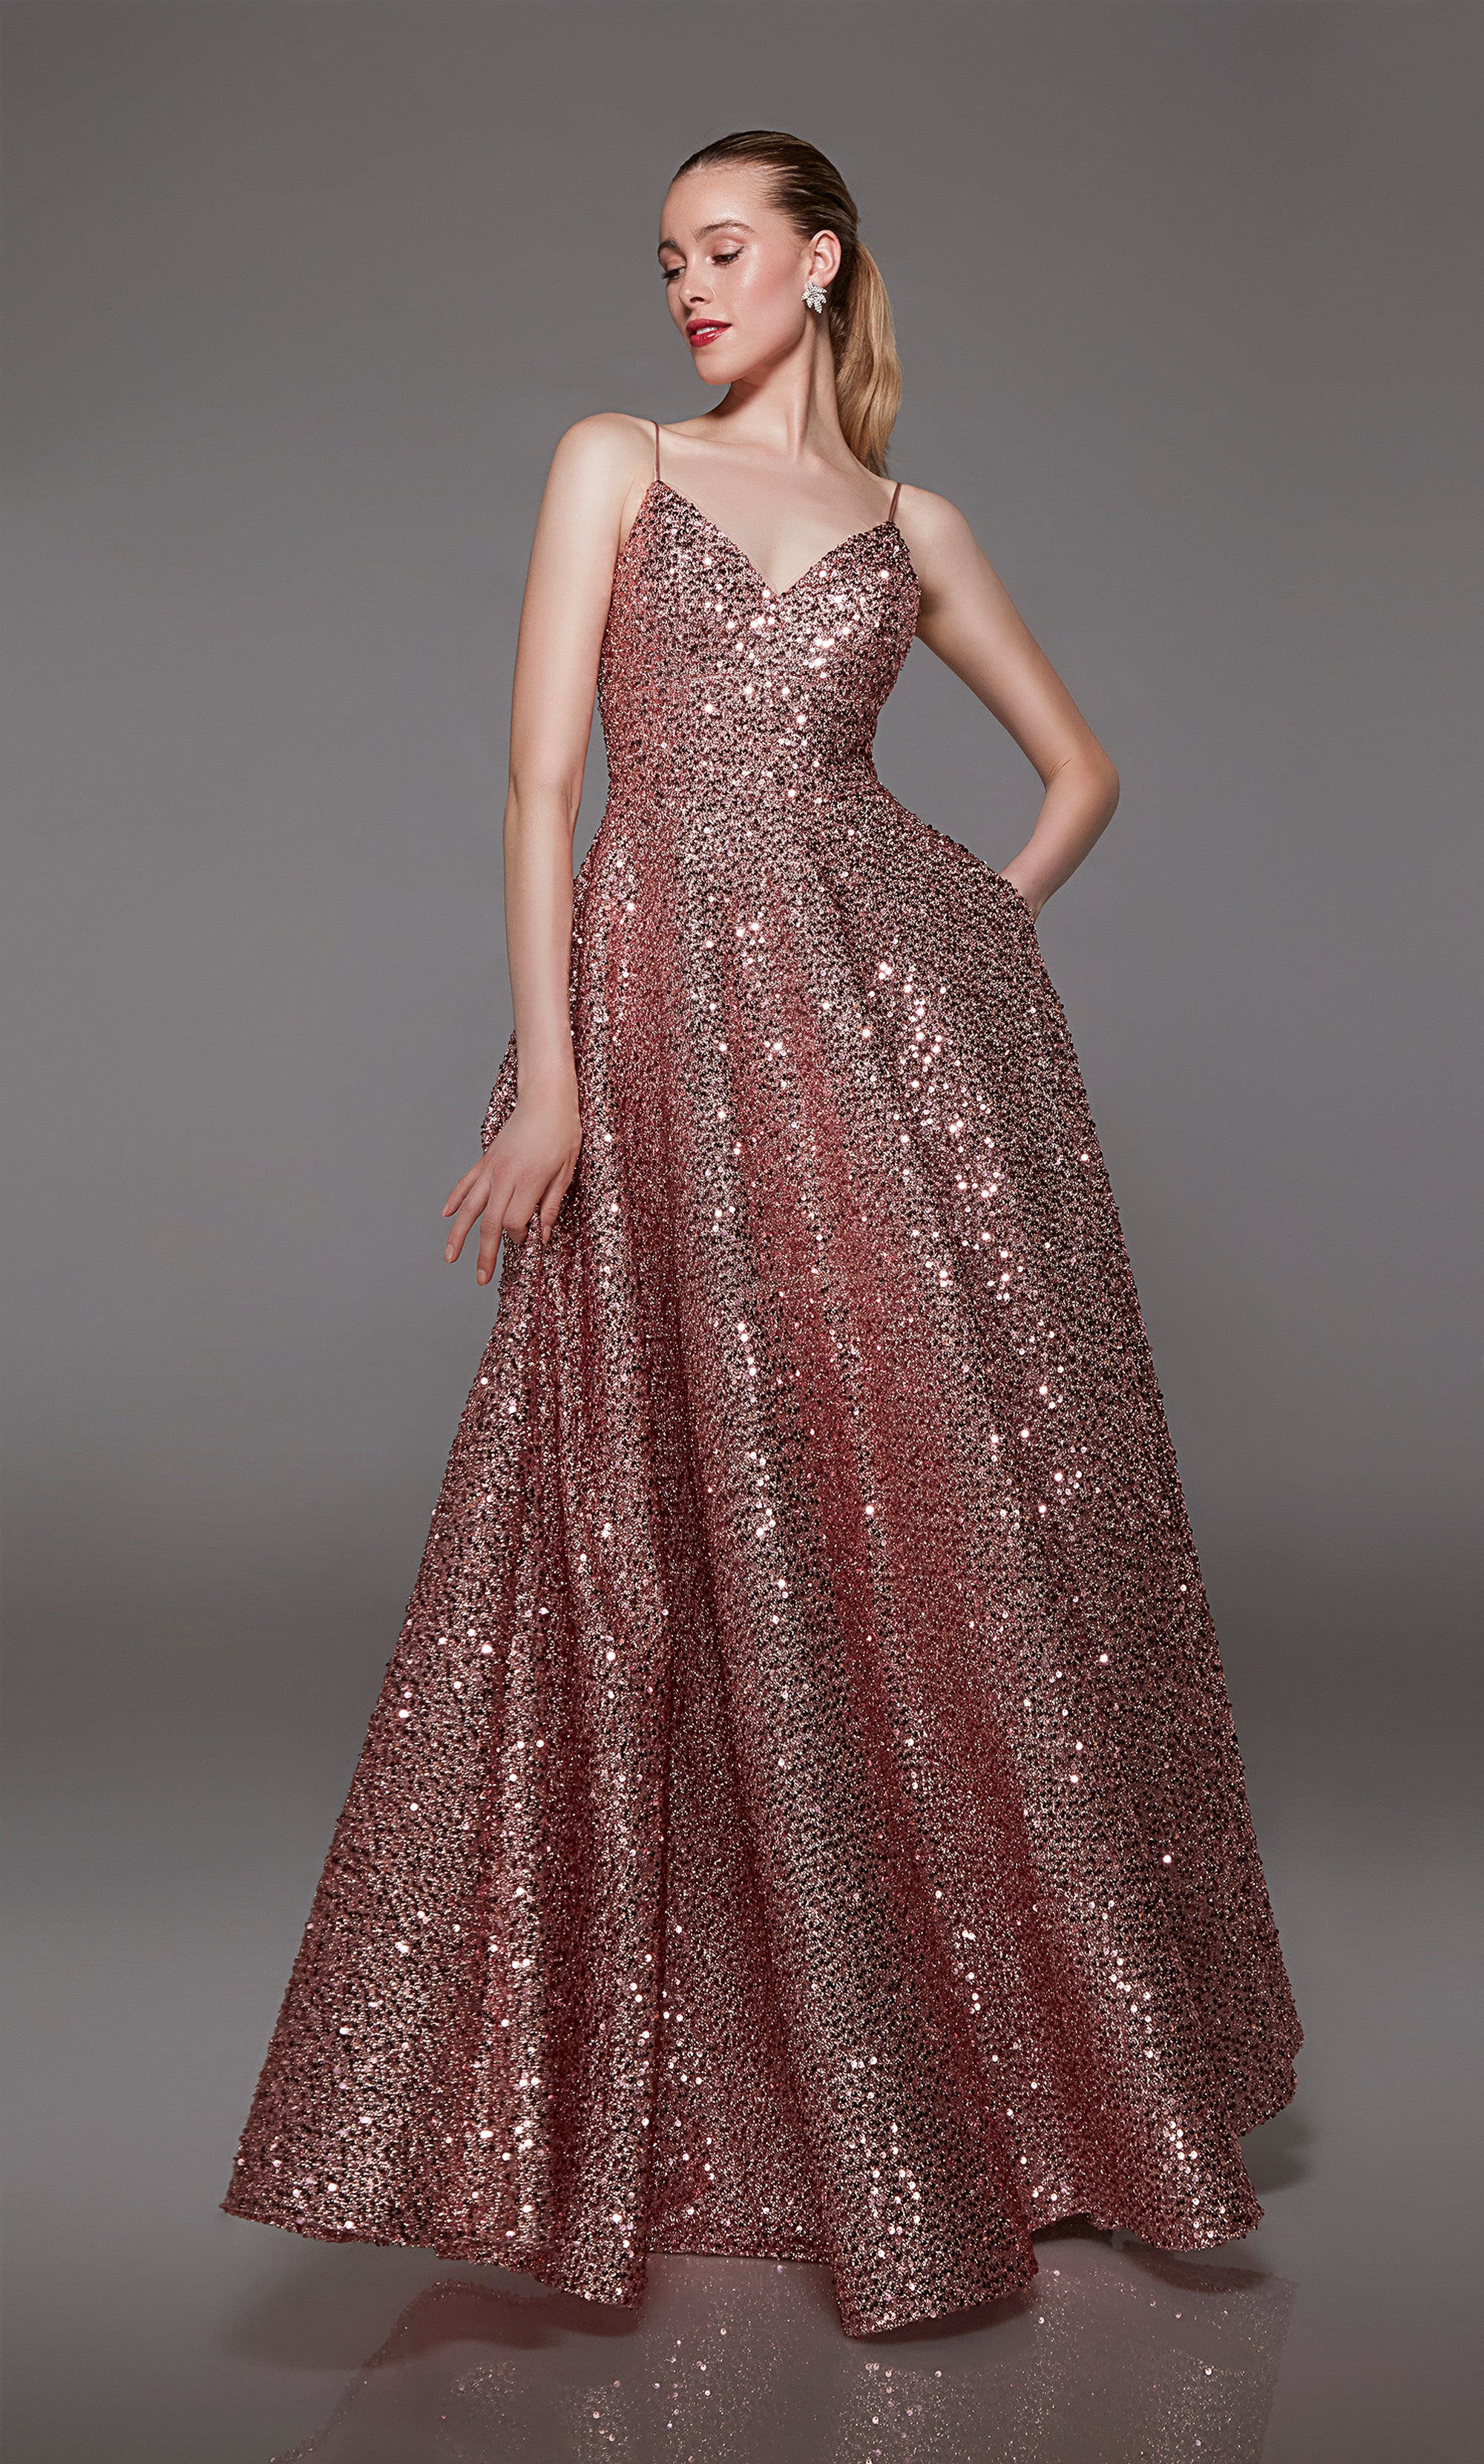 Pink sequin designer dress: A-line silhouette, pockets, V-neckline, and an chic V-shaped back for an stylish and glamorous look.